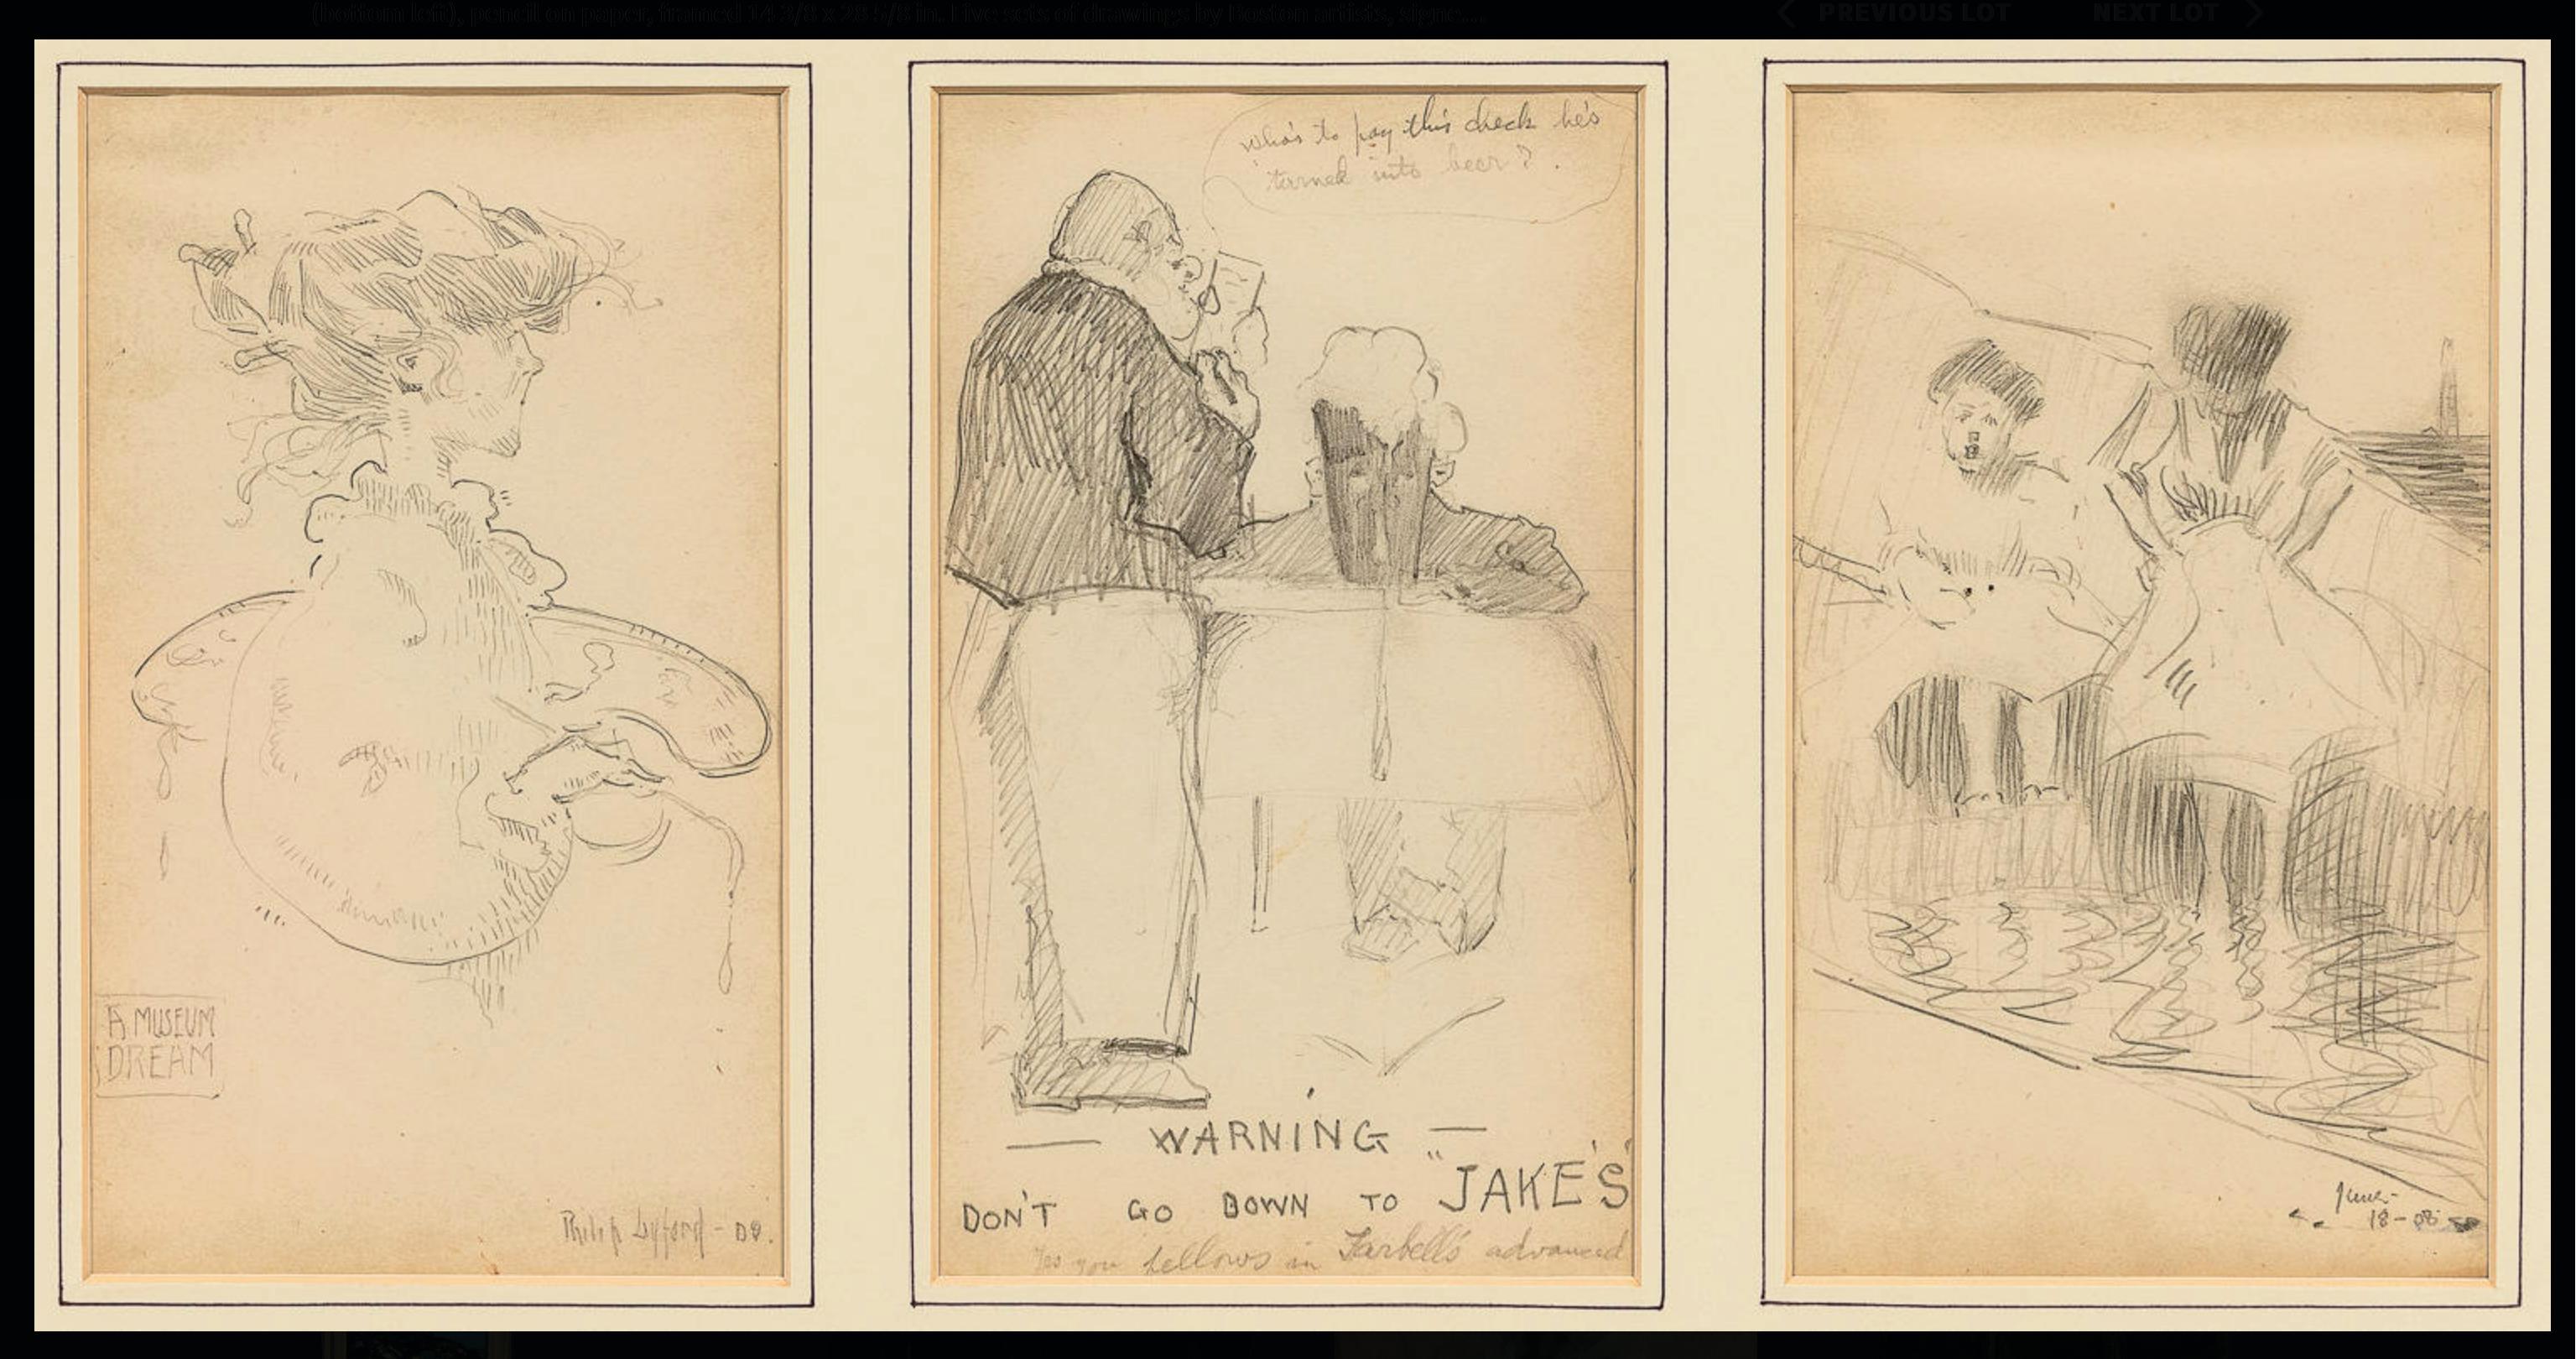 3 Drawings by a Boston Artist, Signed, June 2 1908, D2
Three drawings of figures, each 7.75